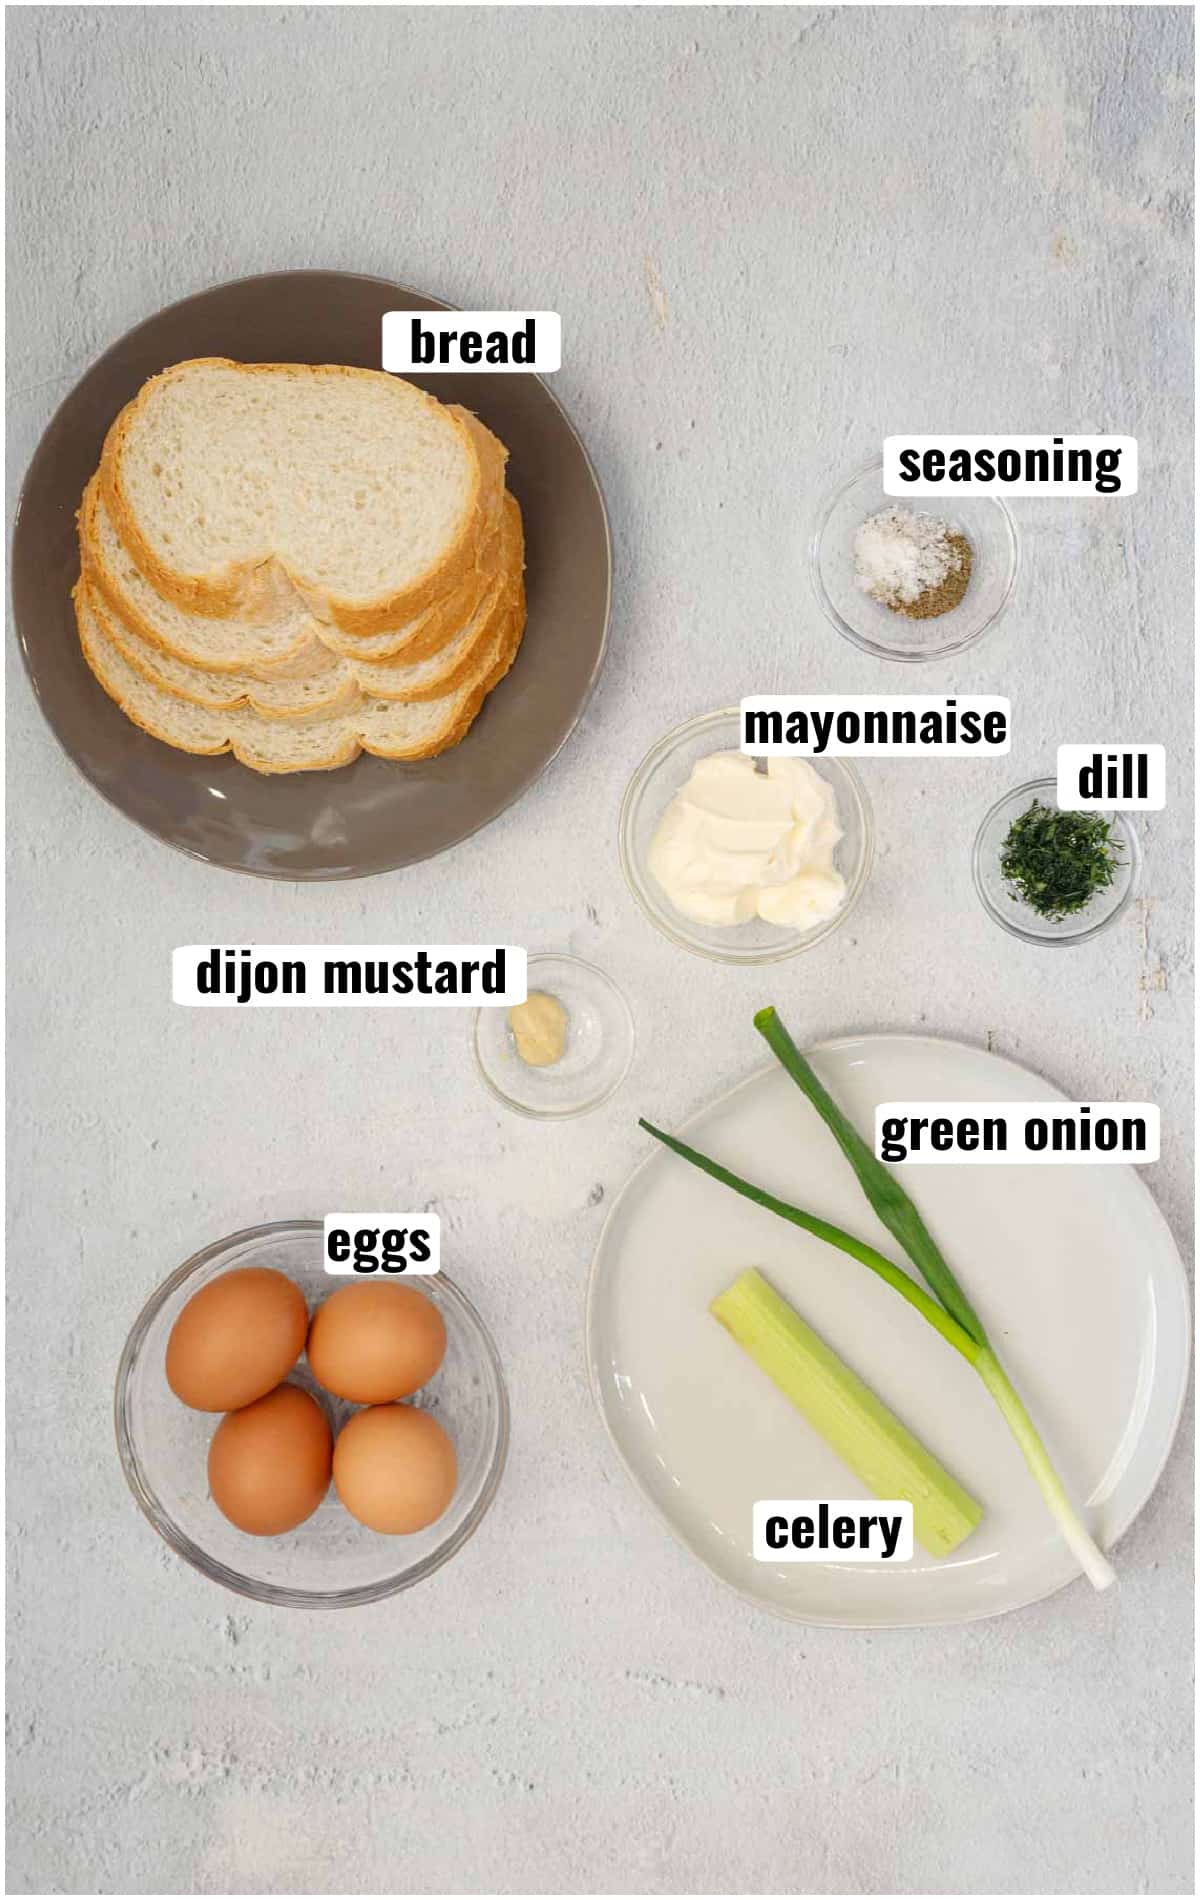 All ingredients needed to make egg salad sandwich.